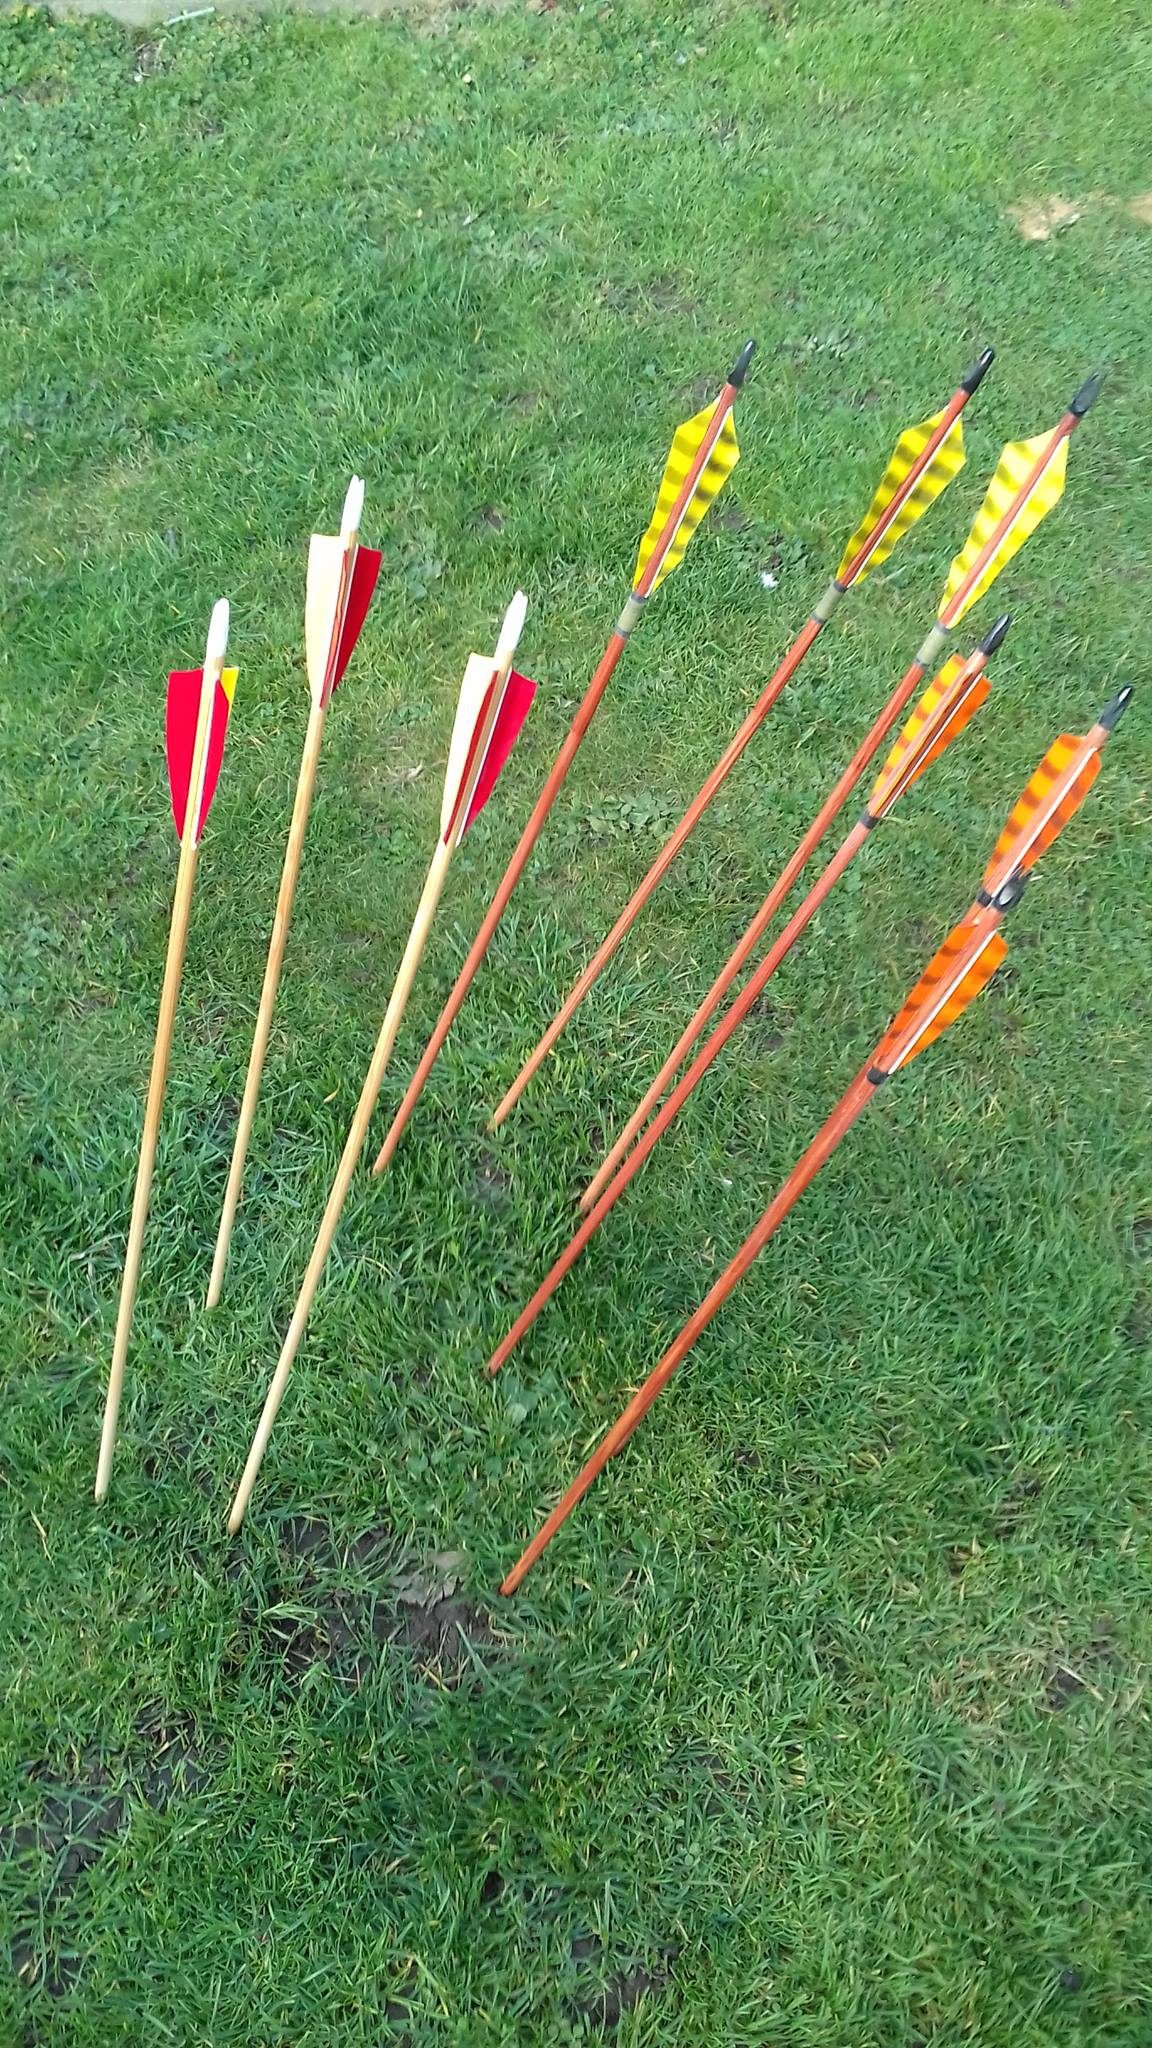 Arrows - Medieval Warbows and Longbows